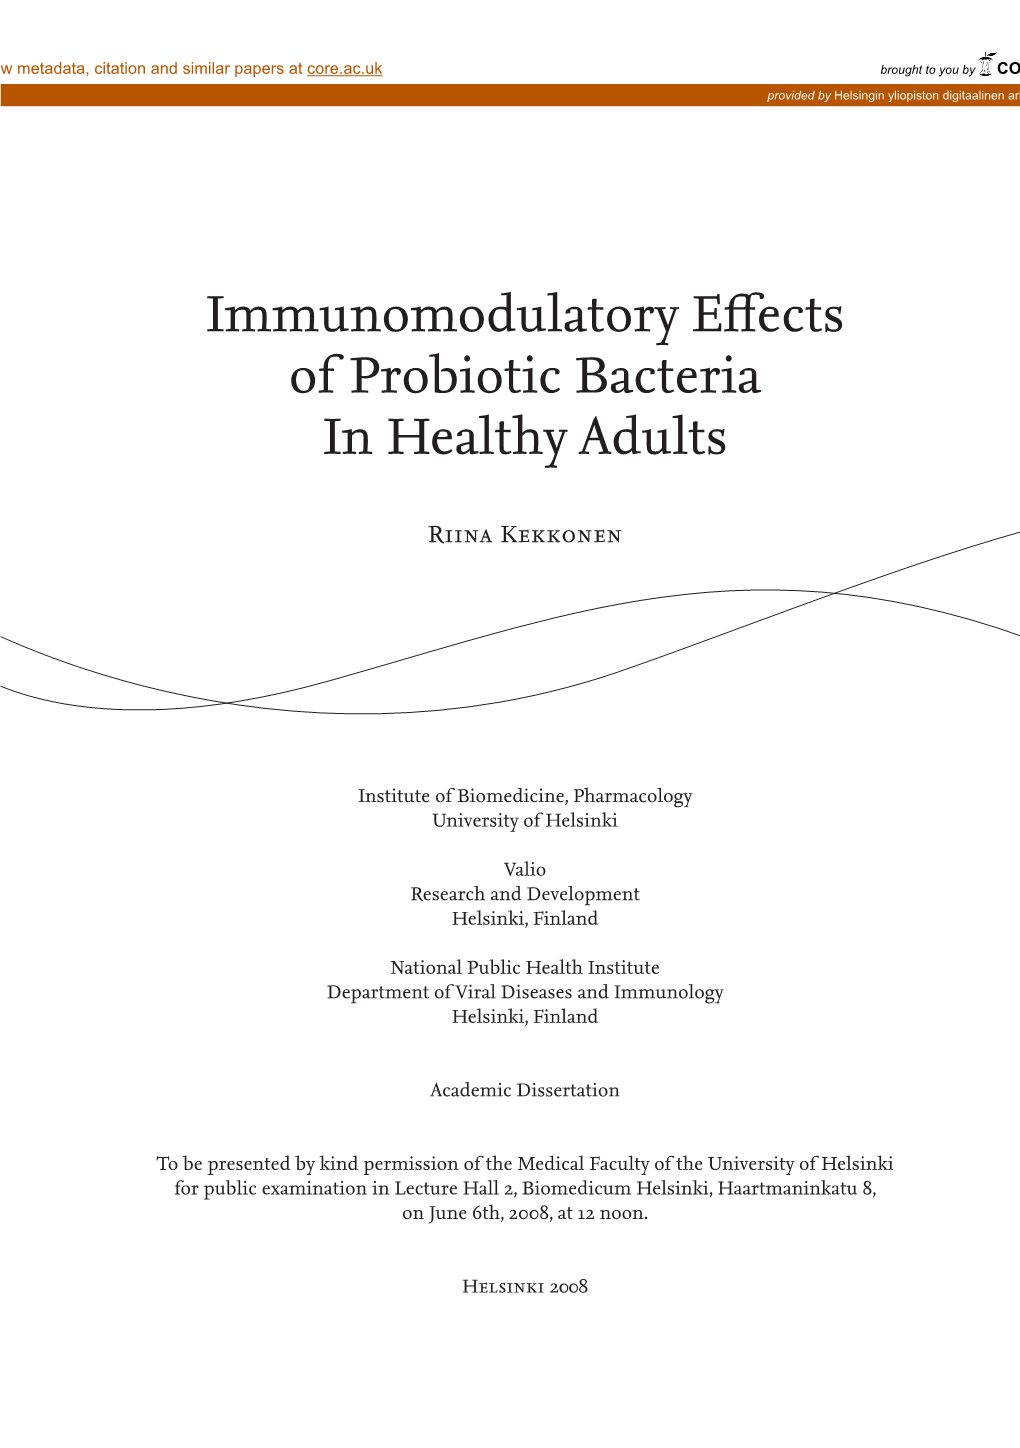 Immunomodulatory Effects of Probiotic Bacteria in Healthy Adults